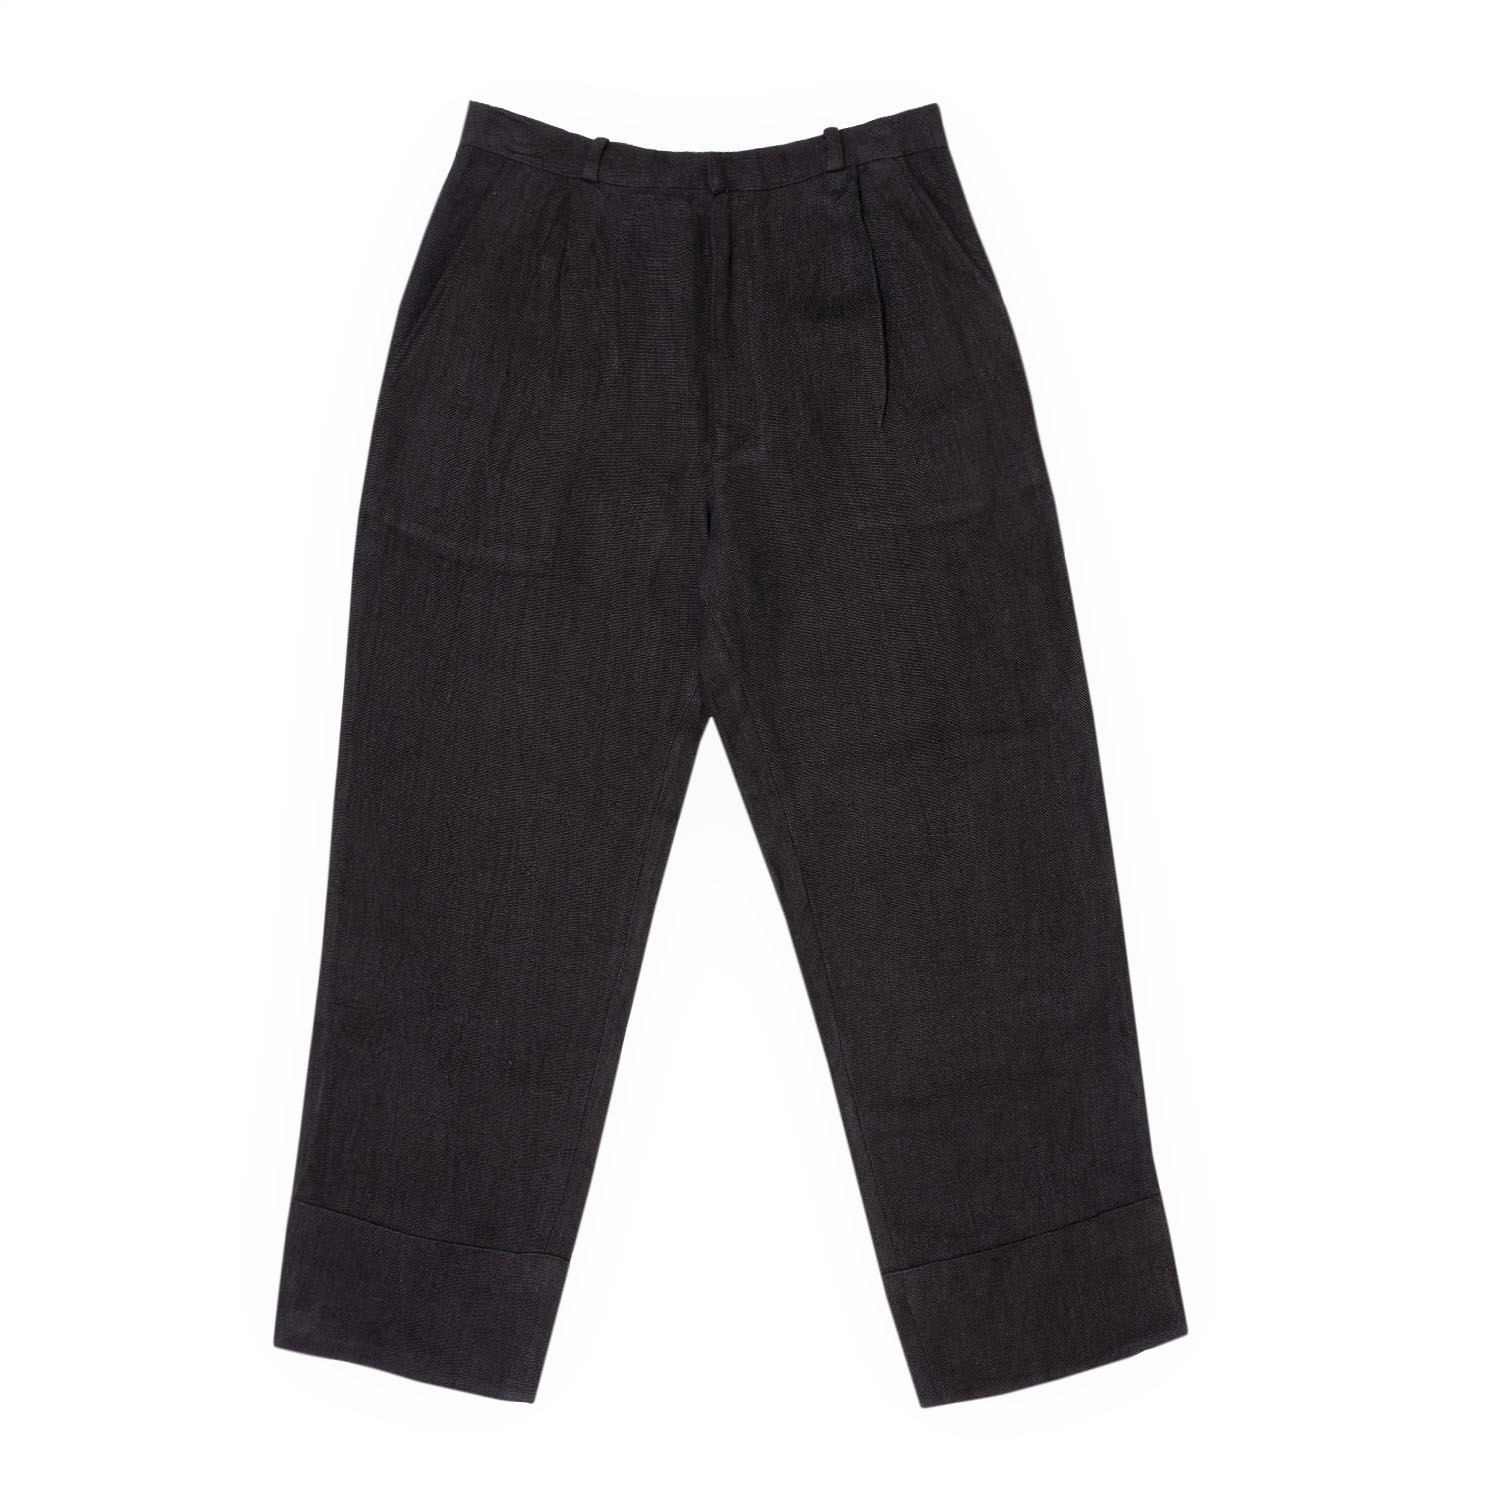 Preto 4 | LaneFortyfive tapered trousers